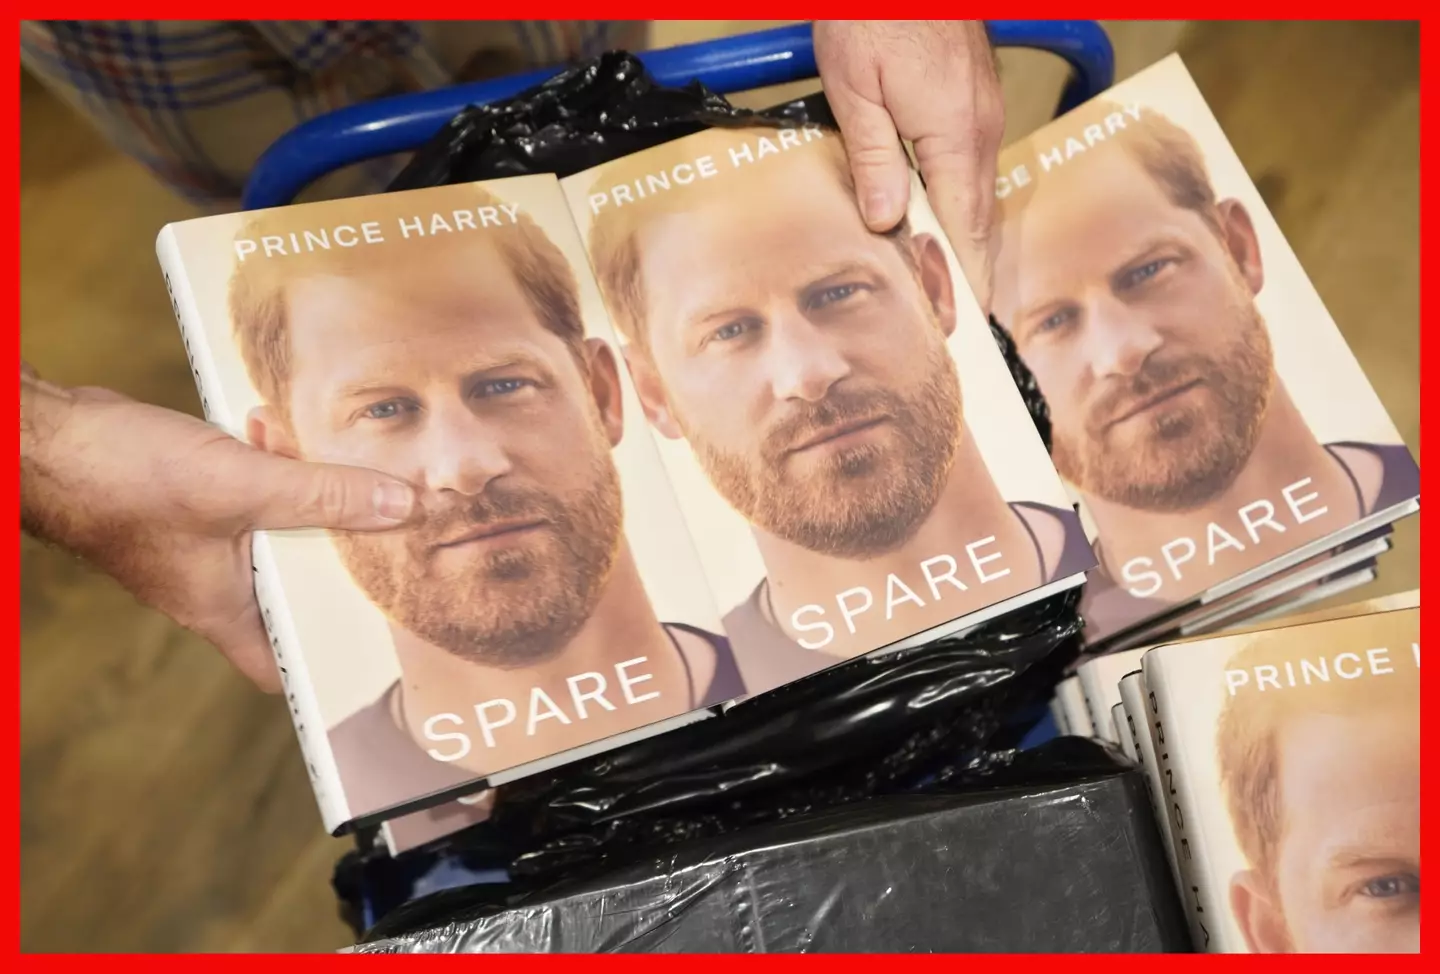 Prince Harry has made a number of revelations in his book, Spare.